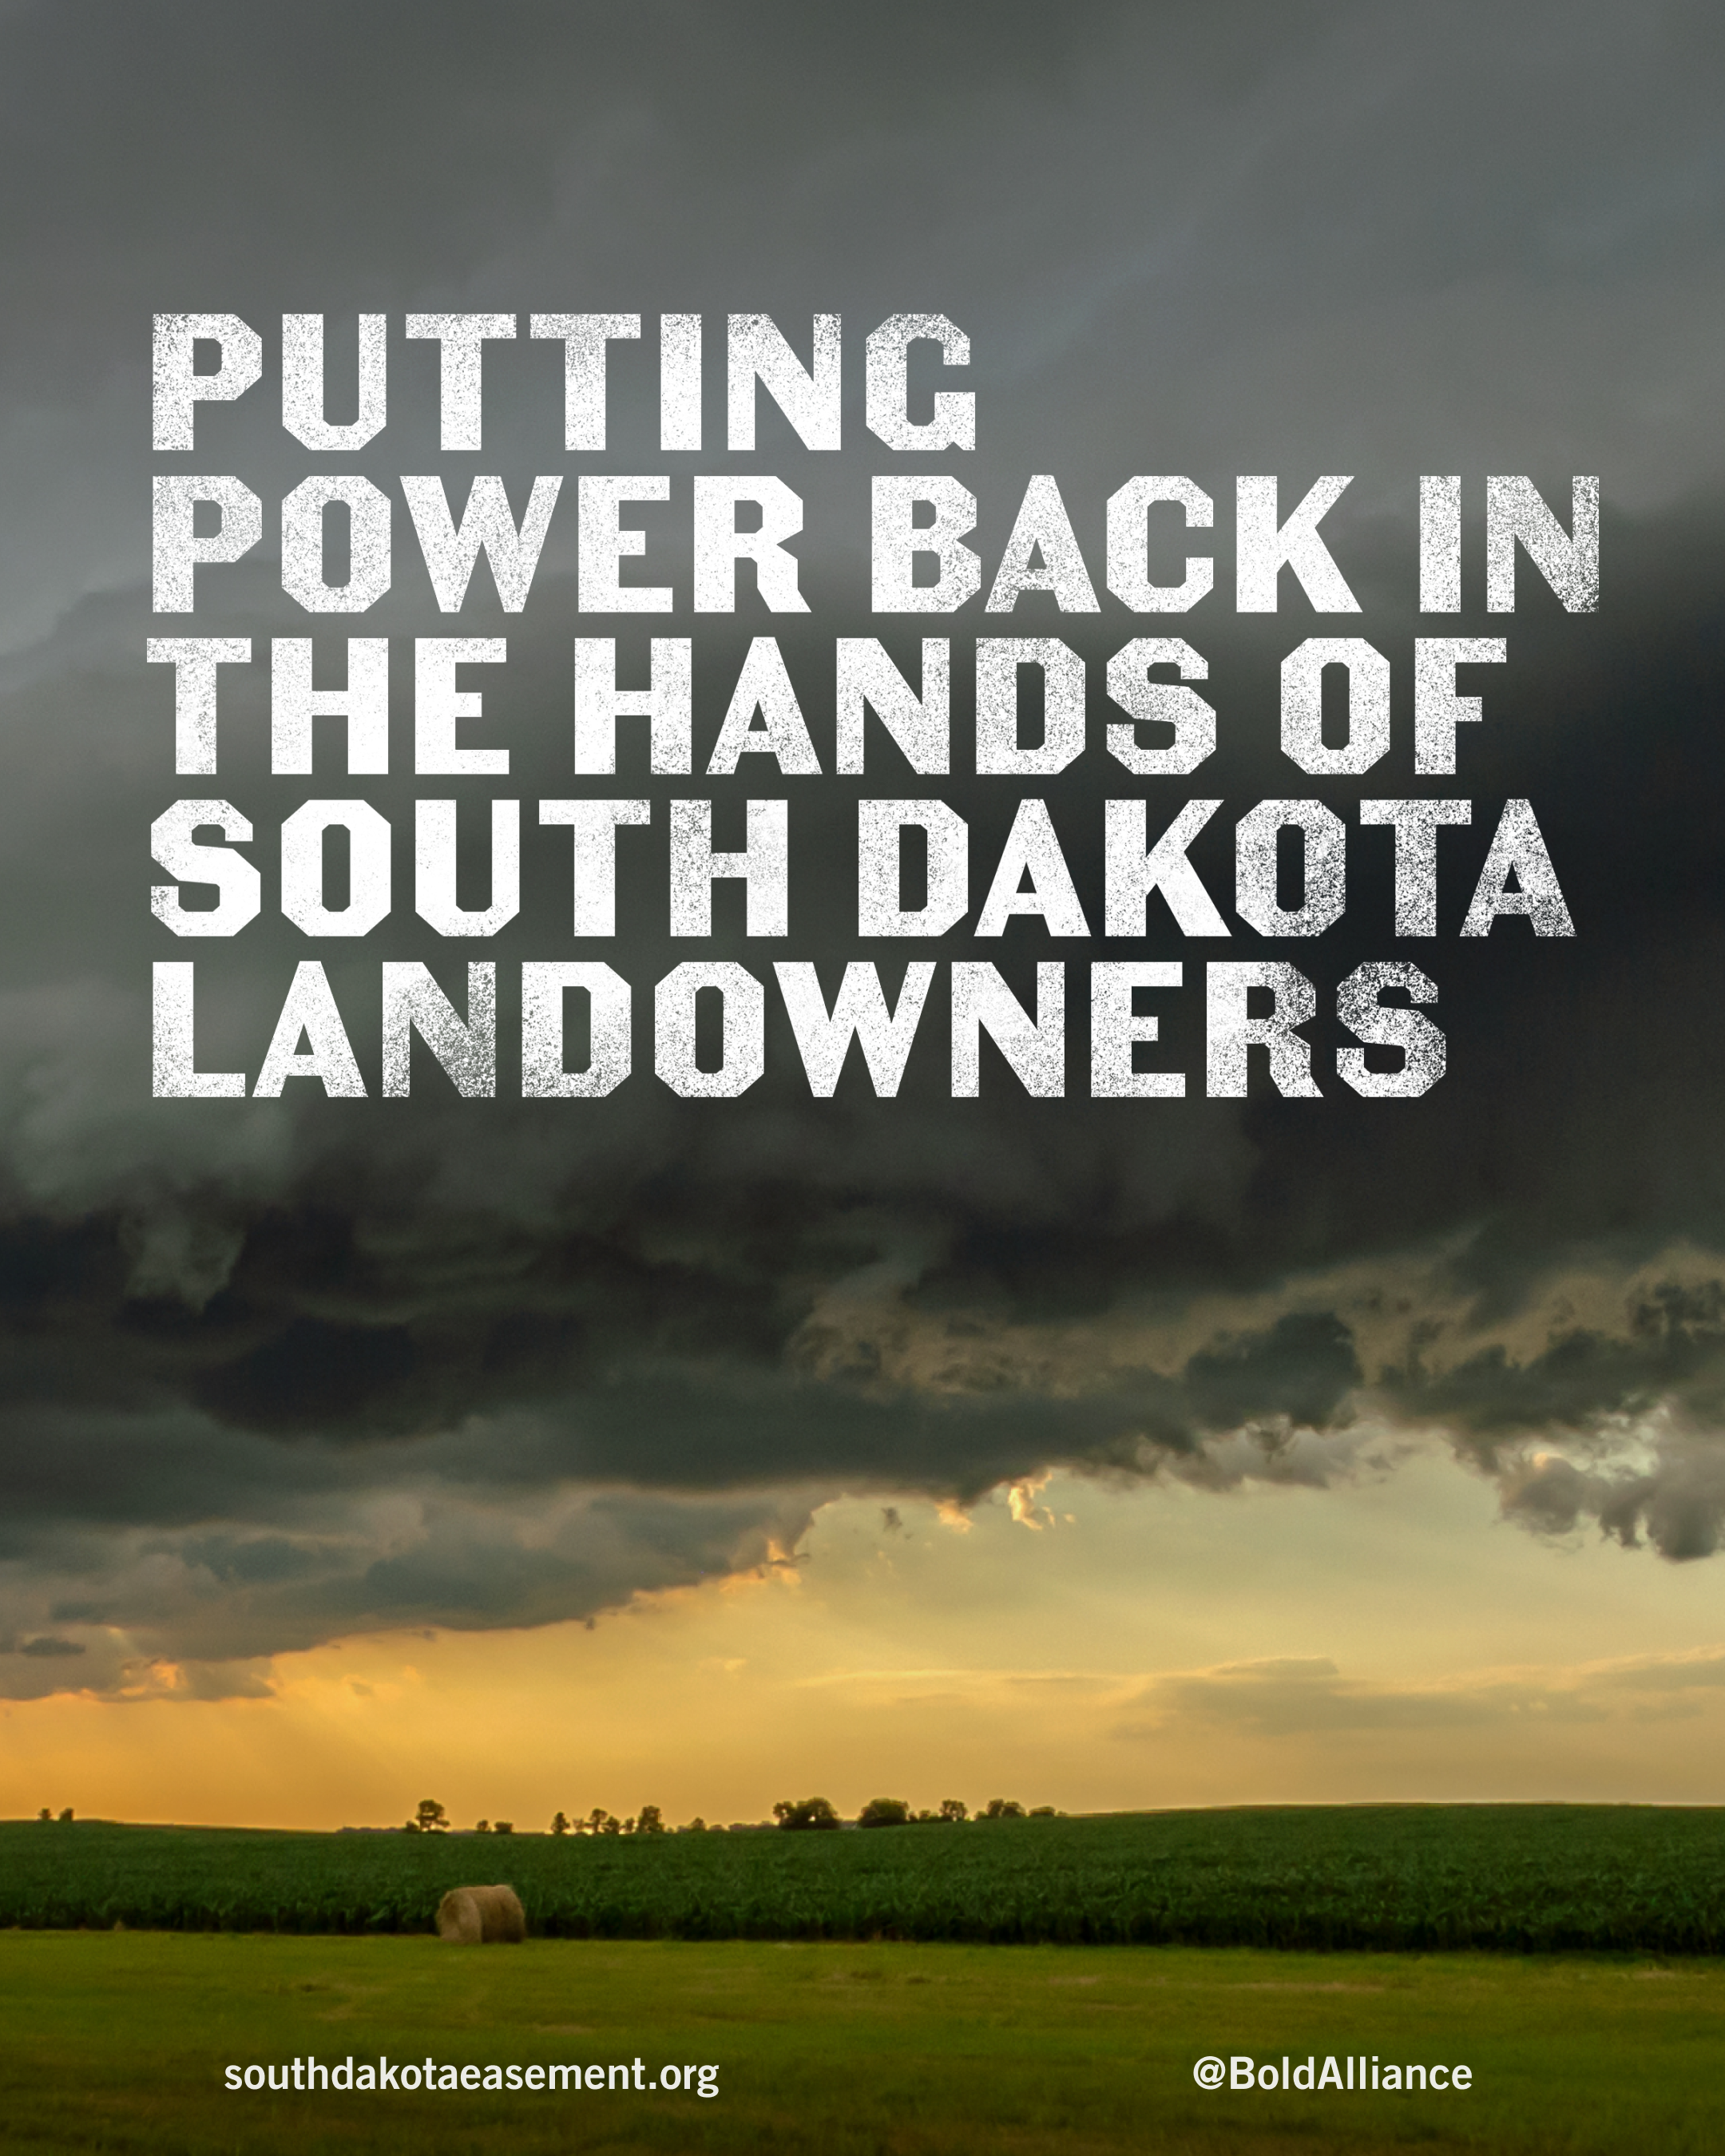 Stormy South Dakota landscape with white text PUTTING THE POWER BACK IN THE HANDS OF SOUTU DAKOTA LANDOWNERS.